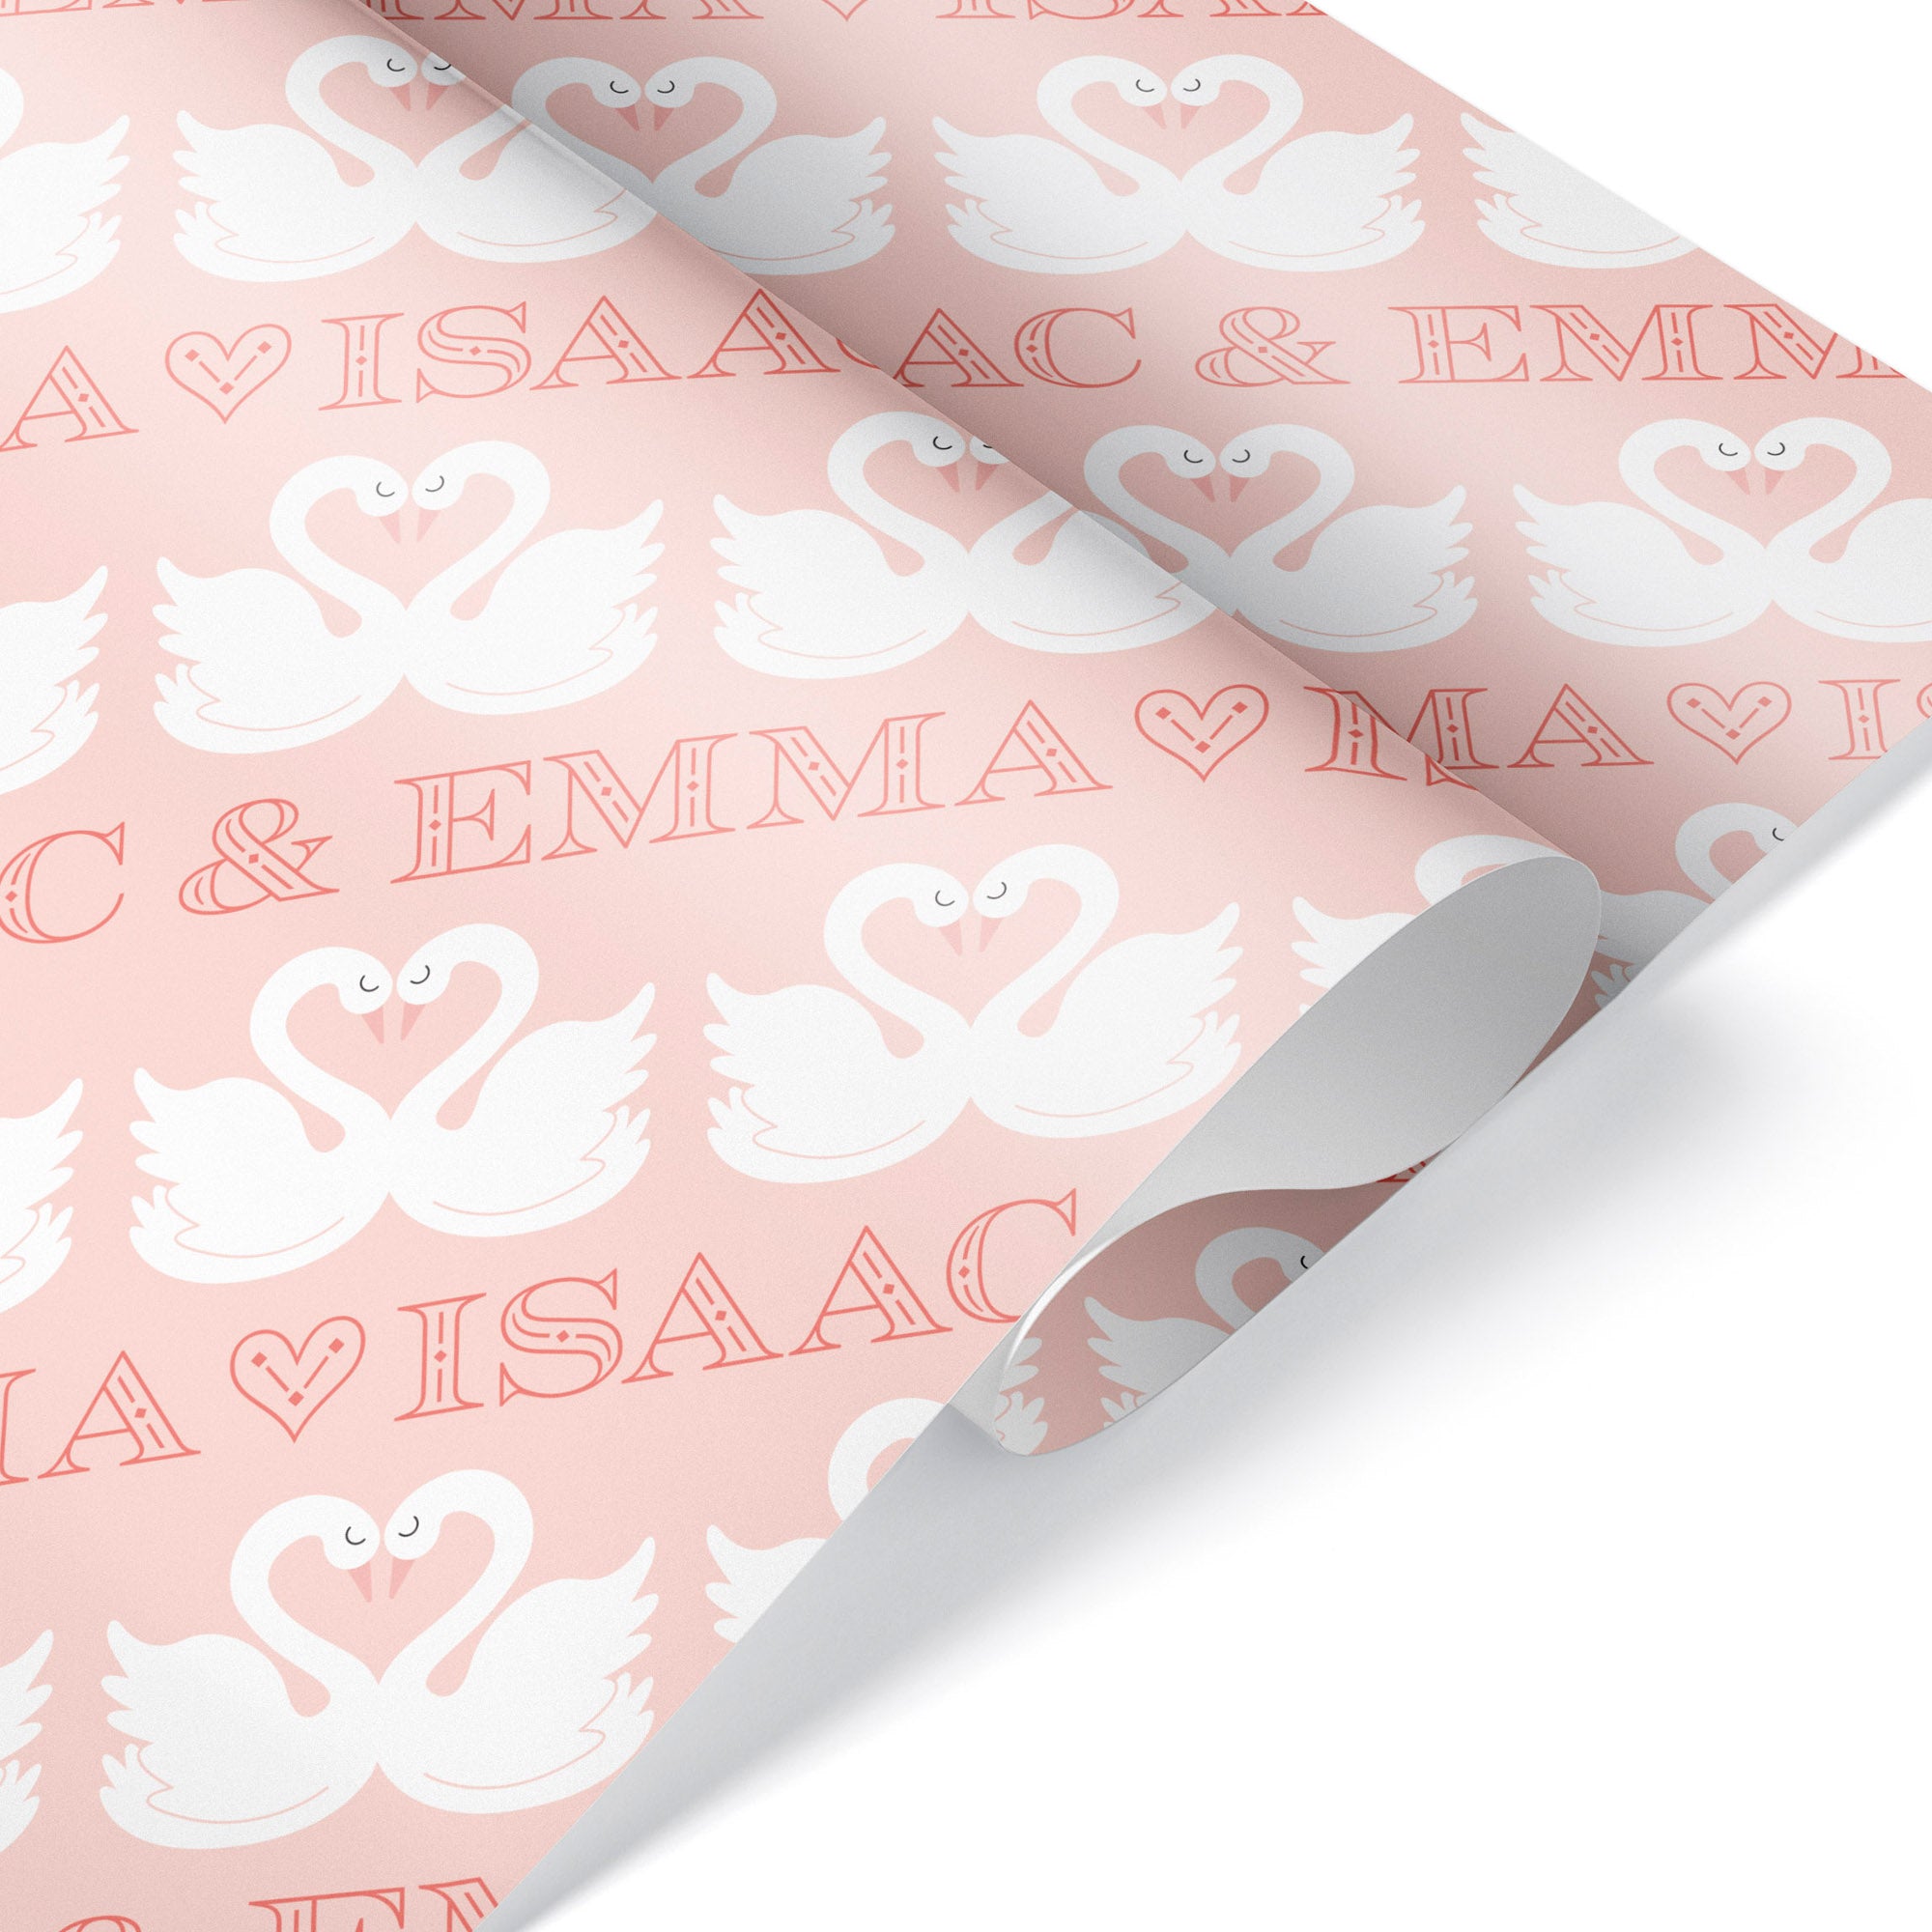 Apol Swan Design Wrapping Paper,Pink Birthday Gift Wrapping Paper for Girl  Woman,4 Folded Sheets Bridal Shower Wedding Wrapping Paper for Christmas